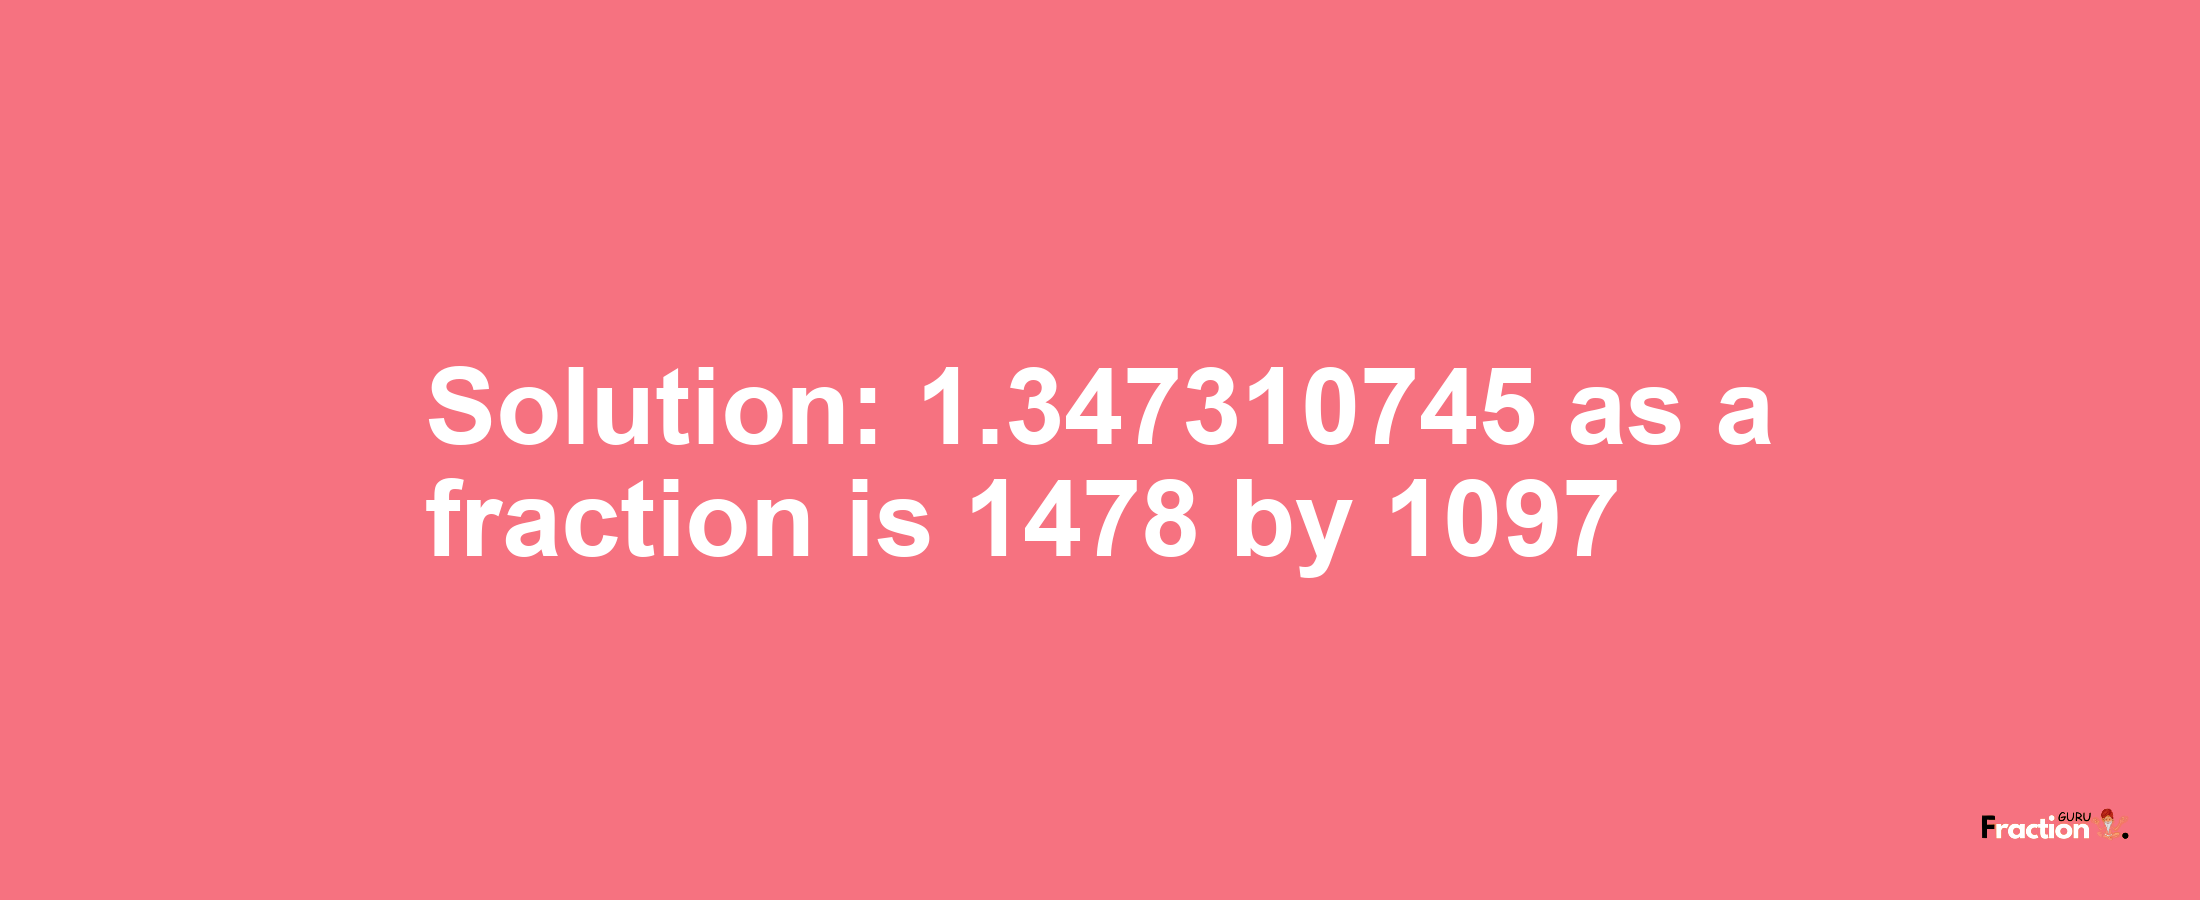 Solution:1.347310745 as a fraction is 1478/1097